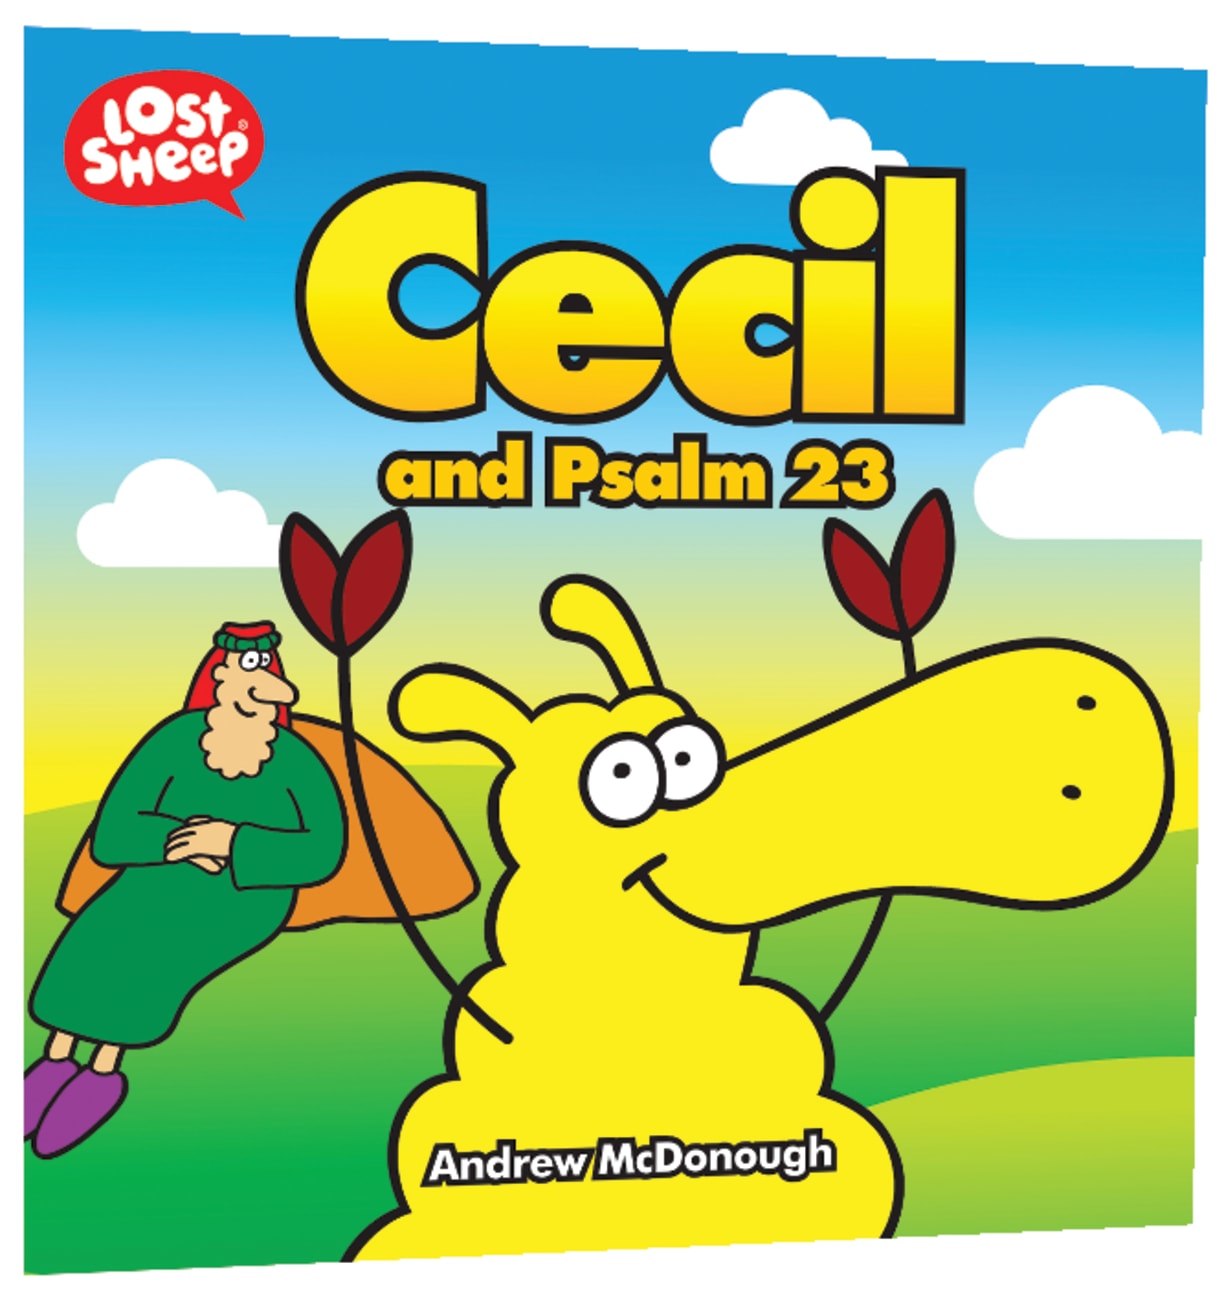 LOST SHEEP:CECIL AND PSALM 23